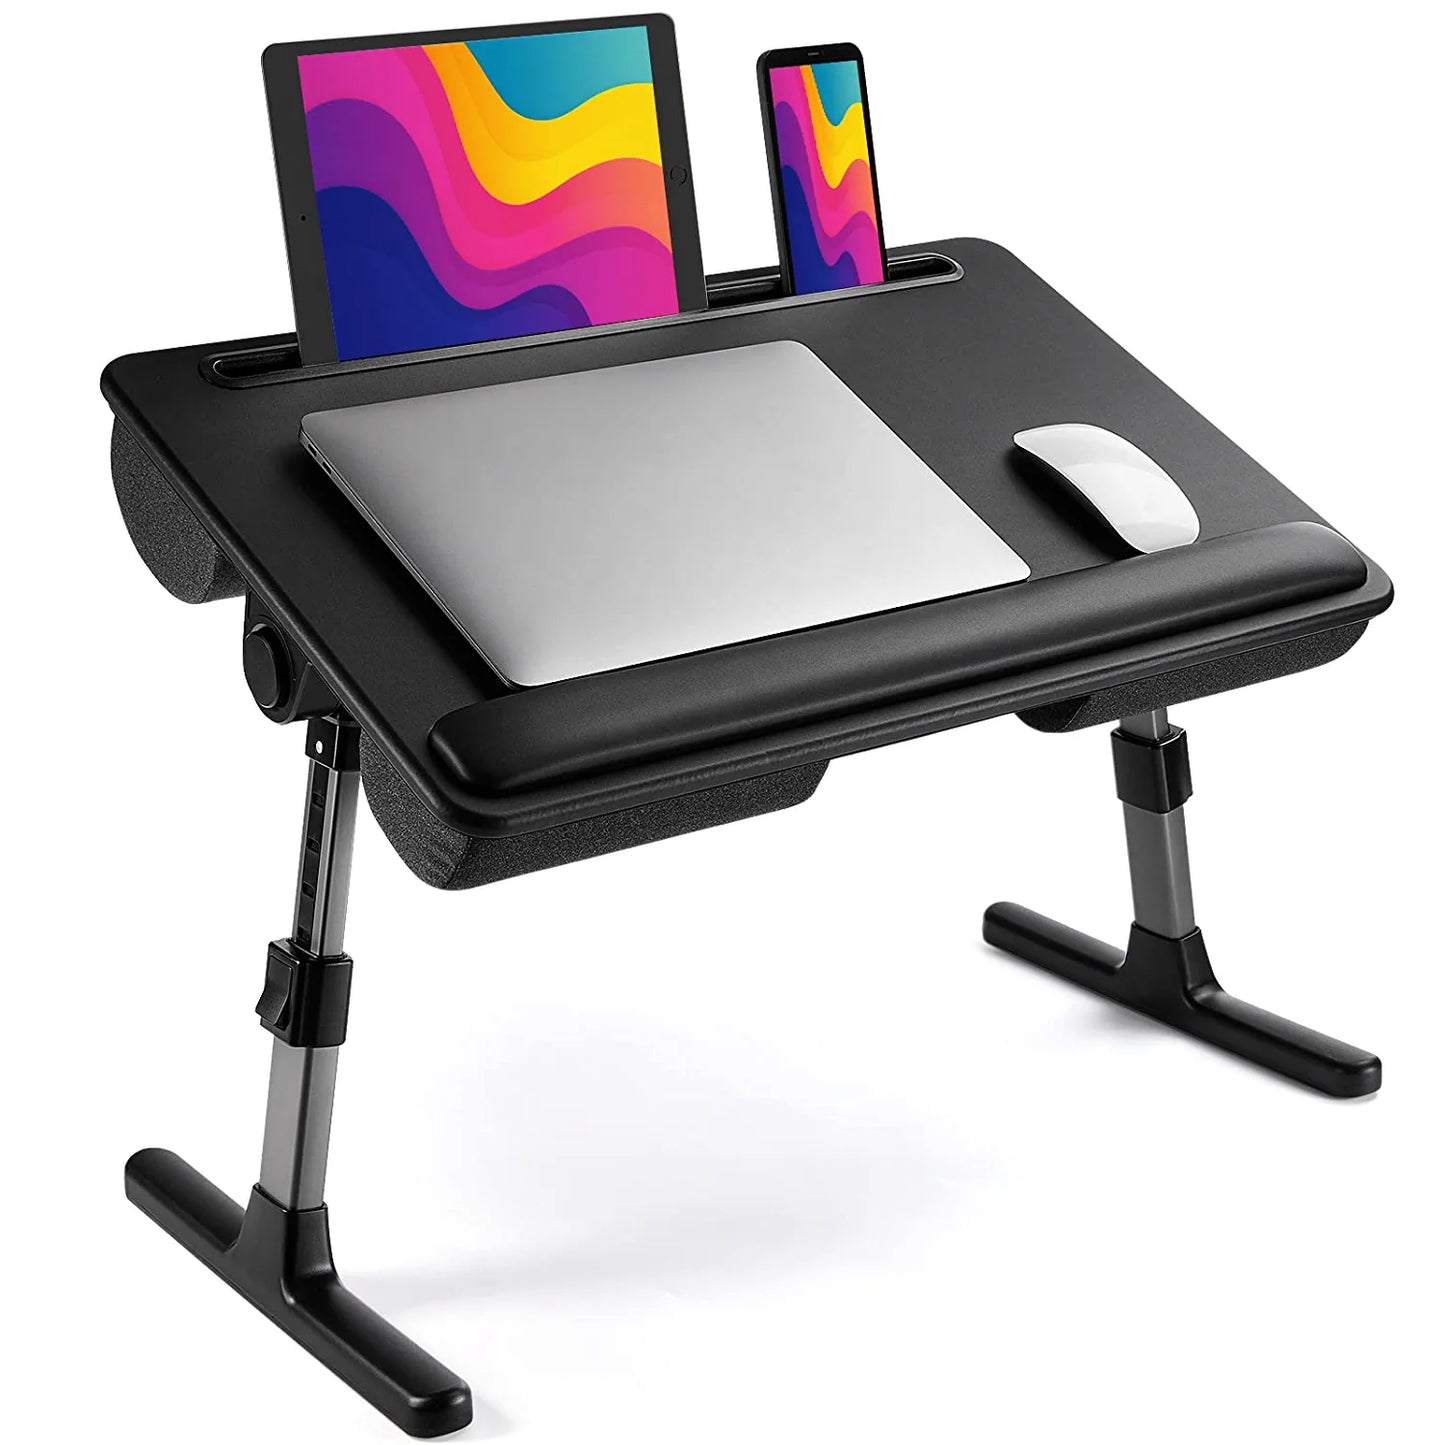 2-In-1 Bed And Lap Desk